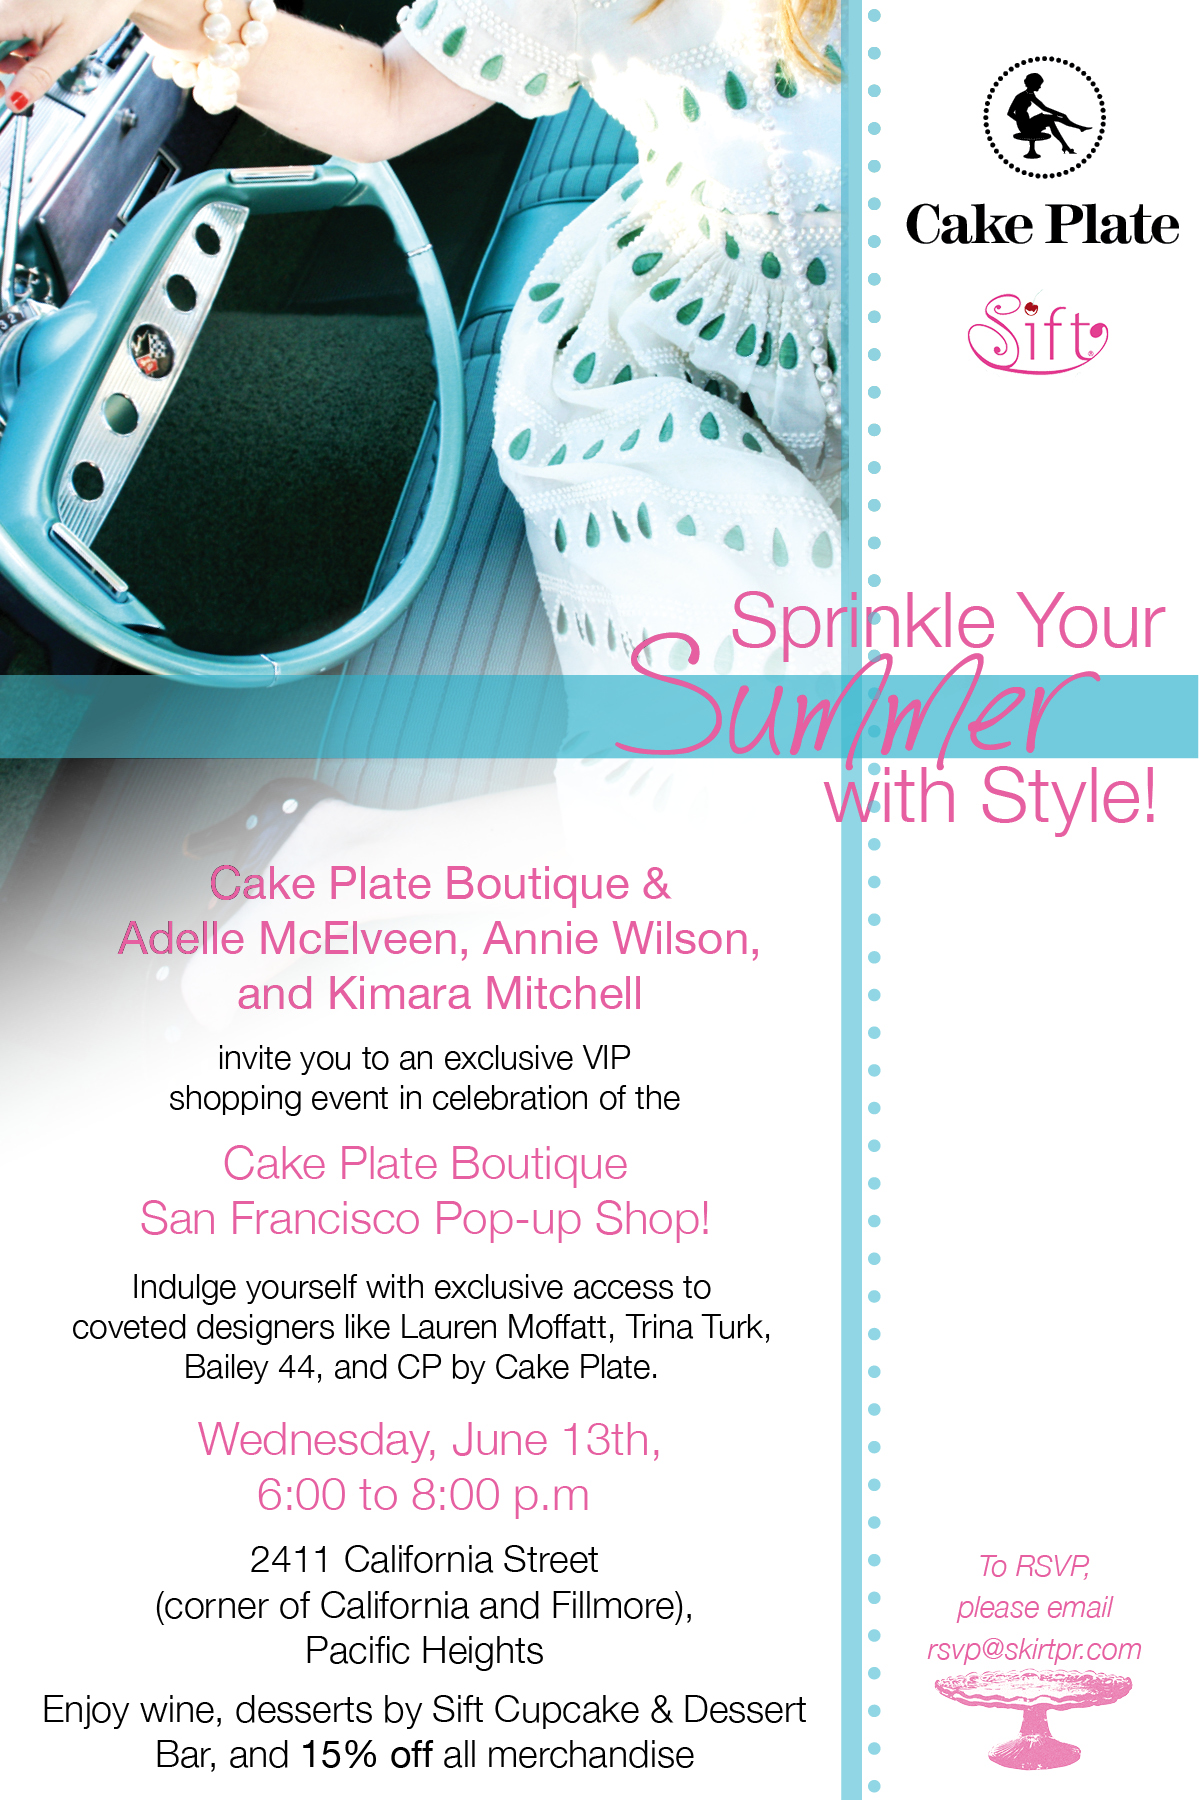 VIP Shopping Party at Cake Plate Boutique